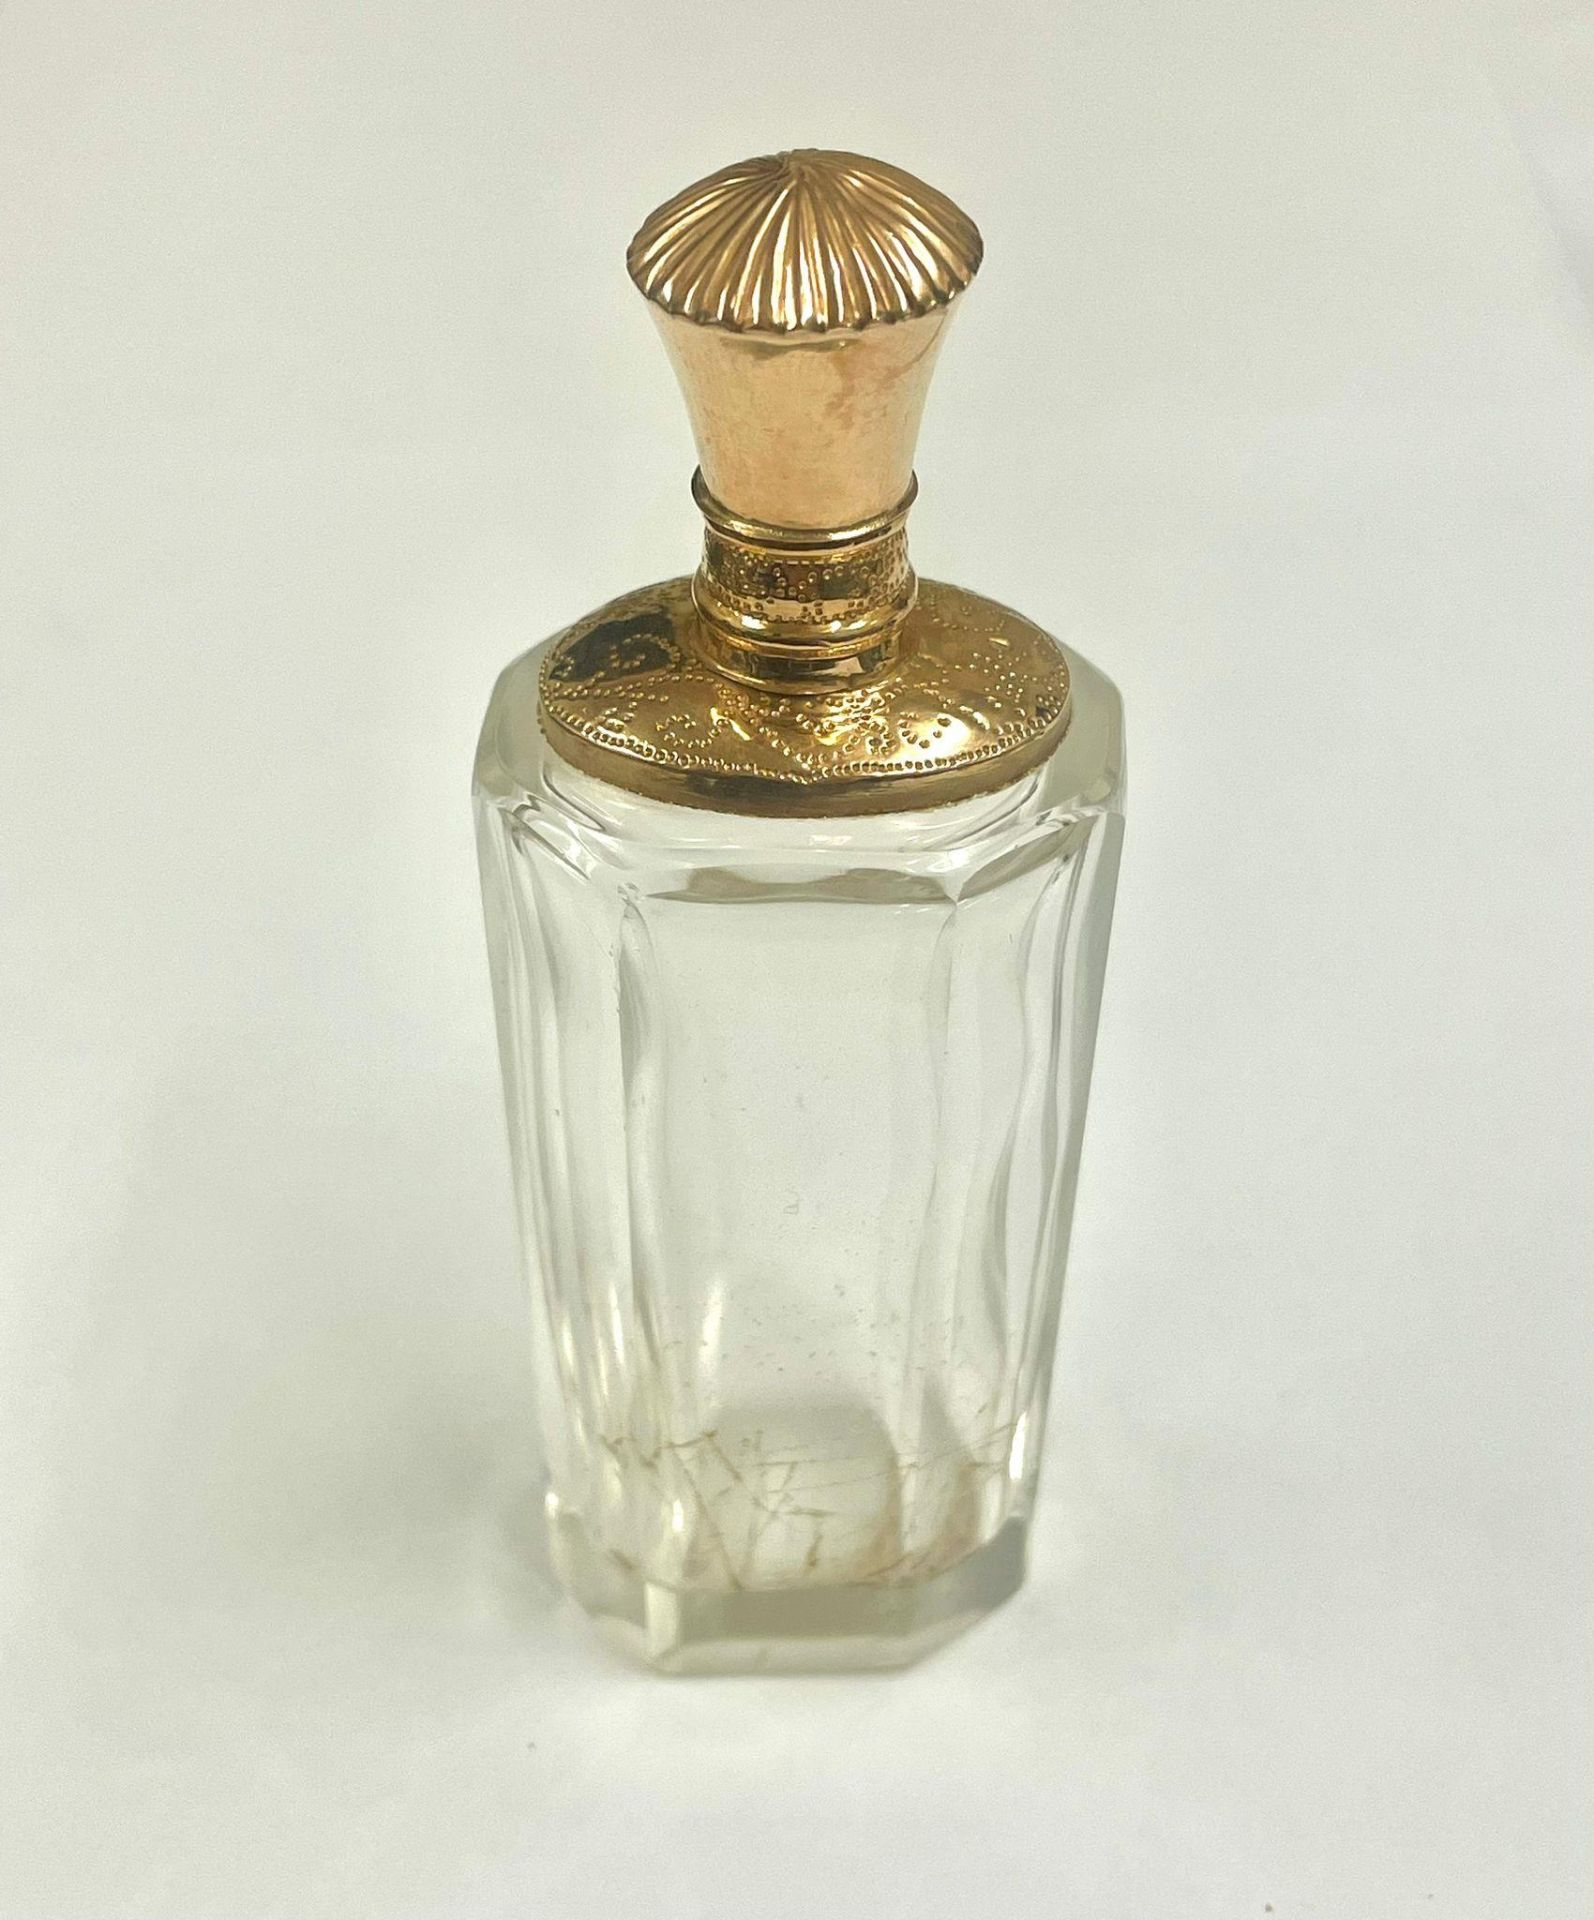 14ct gold lid scent bottle - Image 2 of 2